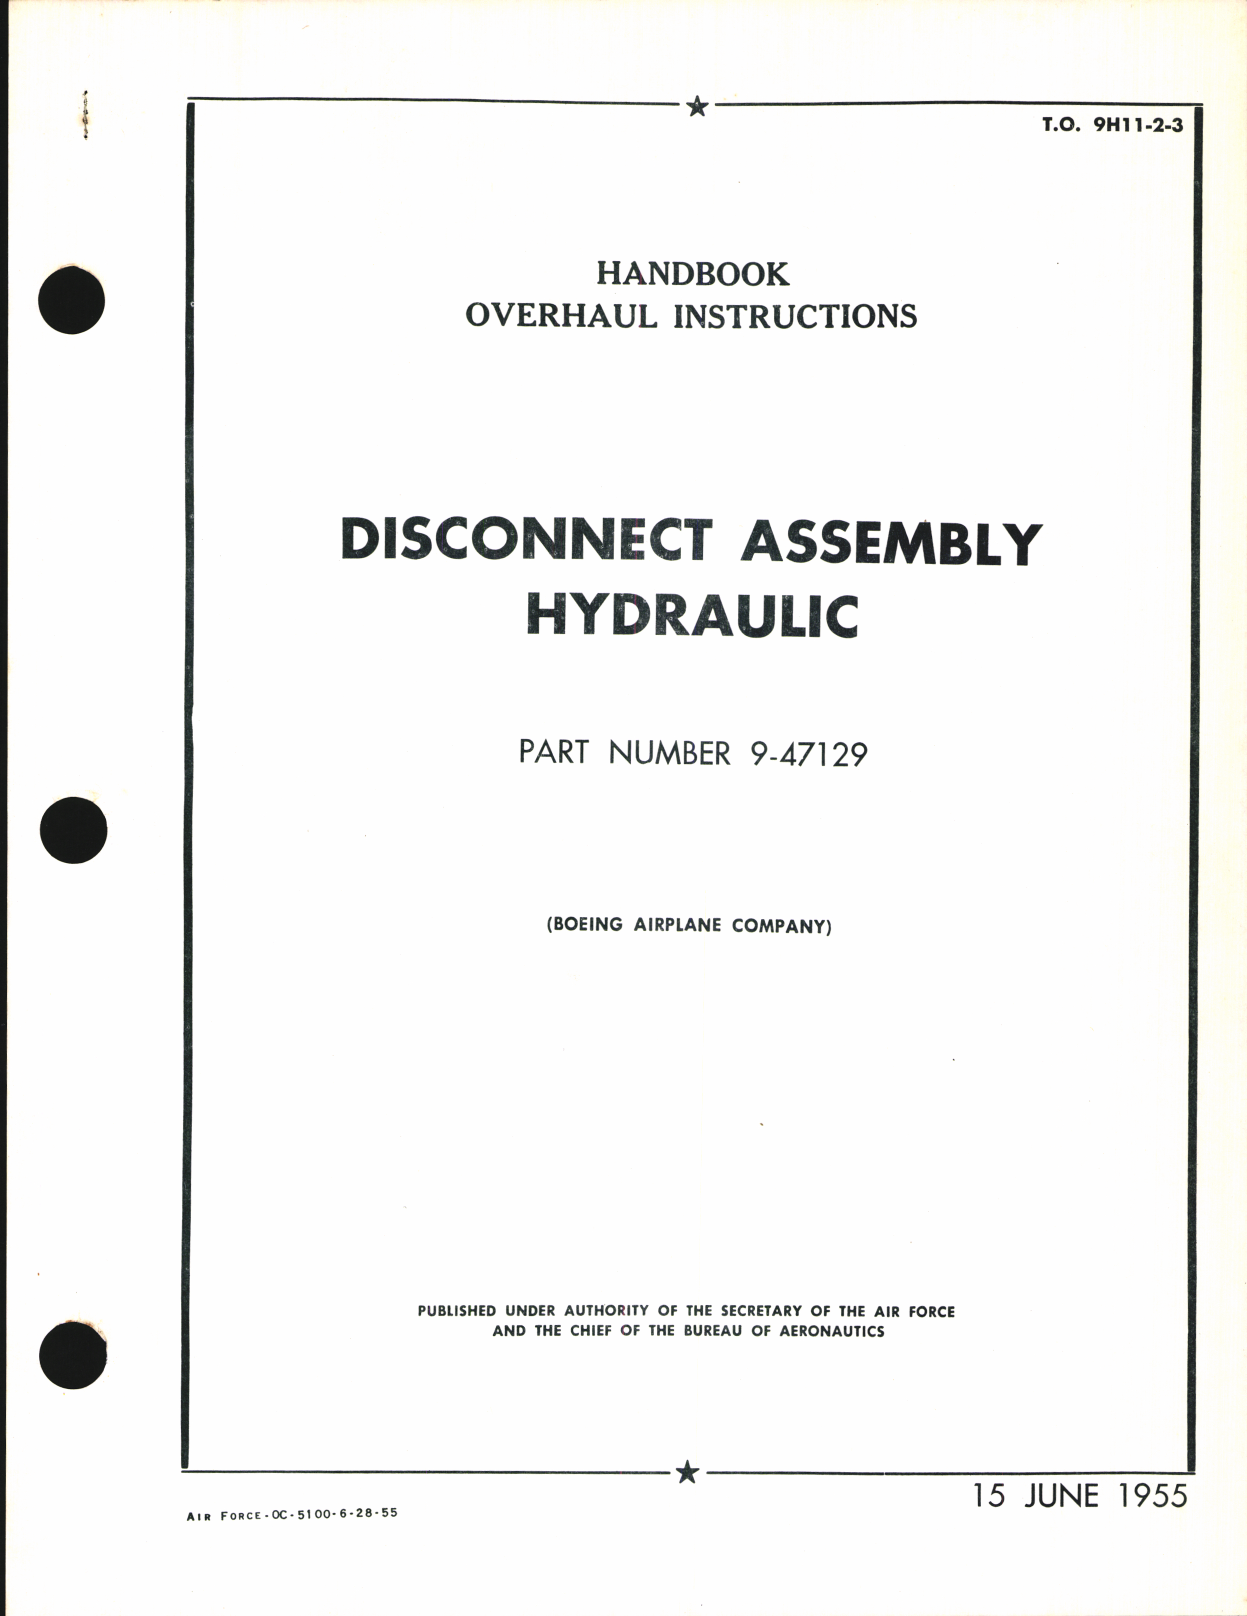 Sample page 1 from AirCorps Library document: Handbook of Overhaul Instructions for Disconnect Assembly Hydraulic Part No. 9-47129